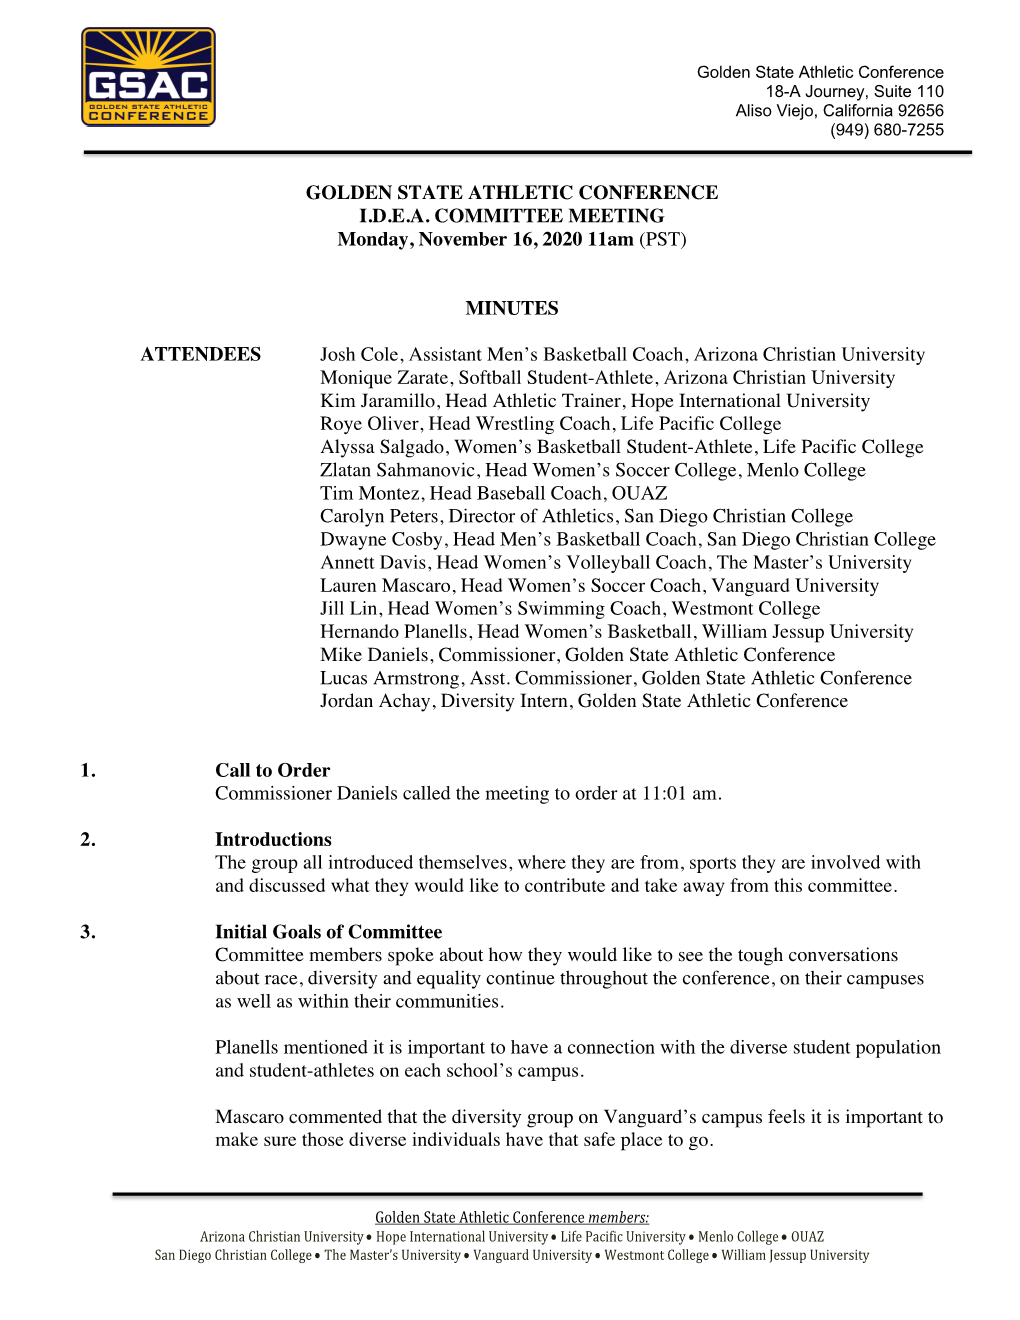 GOLDEN STATE ATHLETIC CONFERENCE I.D.E.A. COMMITTEE MEETING Monday, November 16, 2020 11Am (PST)